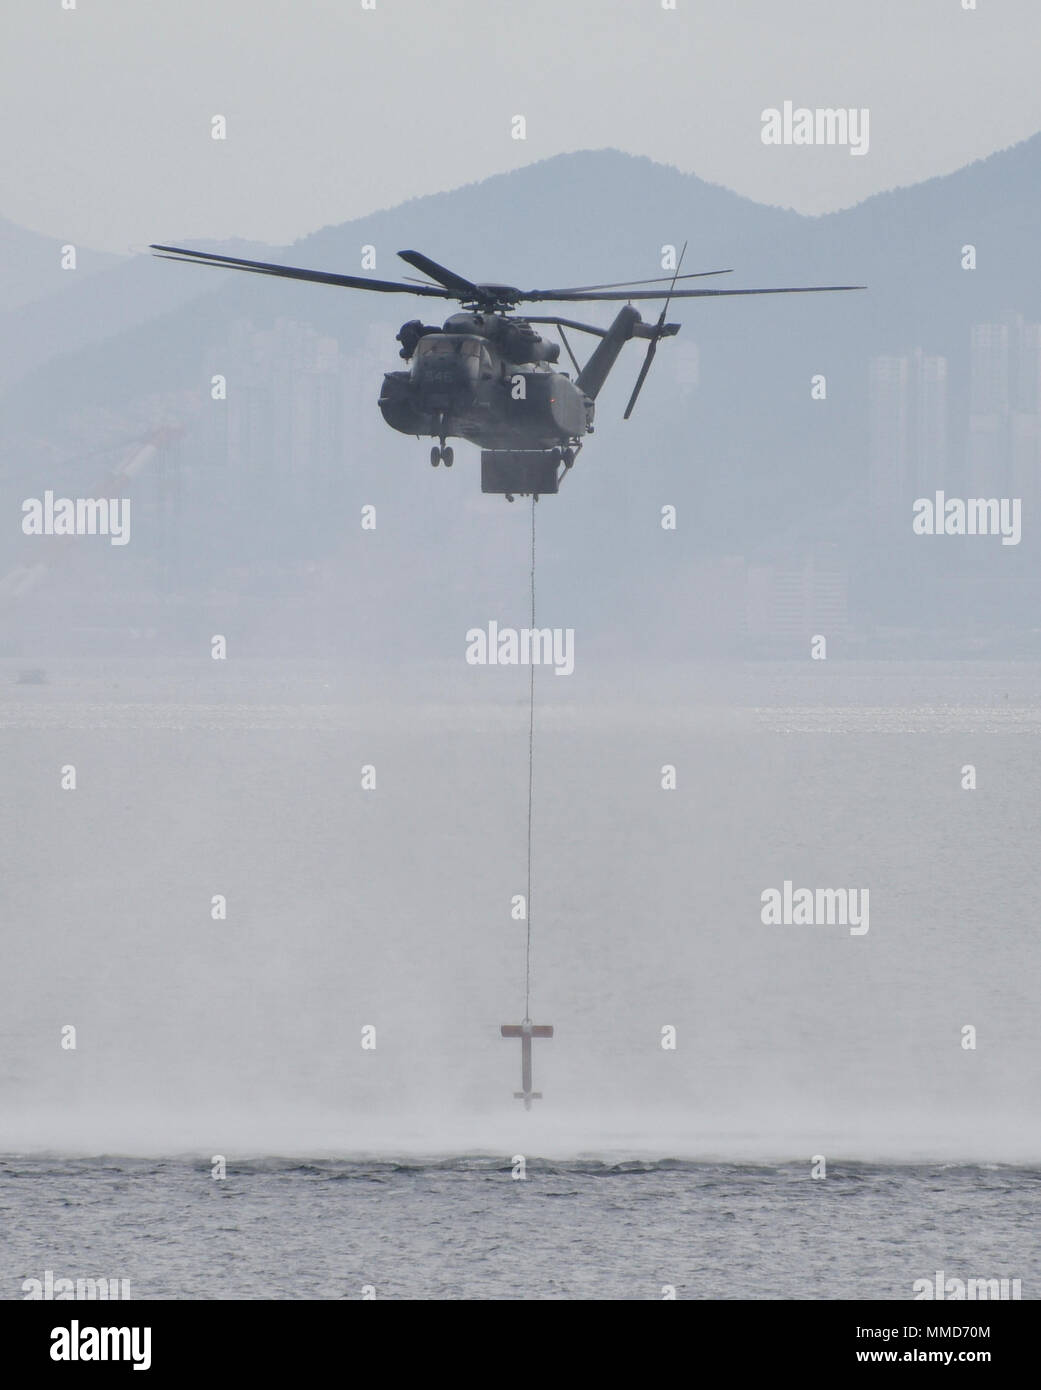 171019-N-TB148-305 BUSAN, Republic of Korea (Oct. 19, 2017) A MH-53E Sea Dragon assigned to the Vanguards of Helicopter Mine Countermeasures Squadron (HM) 14, Detachment 2A lowers a sonar buoy designed to detect underwater mines during the annual Multinational Mine Warfare Exercise (MN MIWEX). MN MIWEX is a mine countermeasures exercise between the U.S., Republic of Korea, and U.N. Command Sending States meant to increase combined capabilities and readiness to respond to any contingency on the Korean peninsula. (U.S. Navy photo by Mass Communication Specialist Seaman William Carlisle) Stock Photo